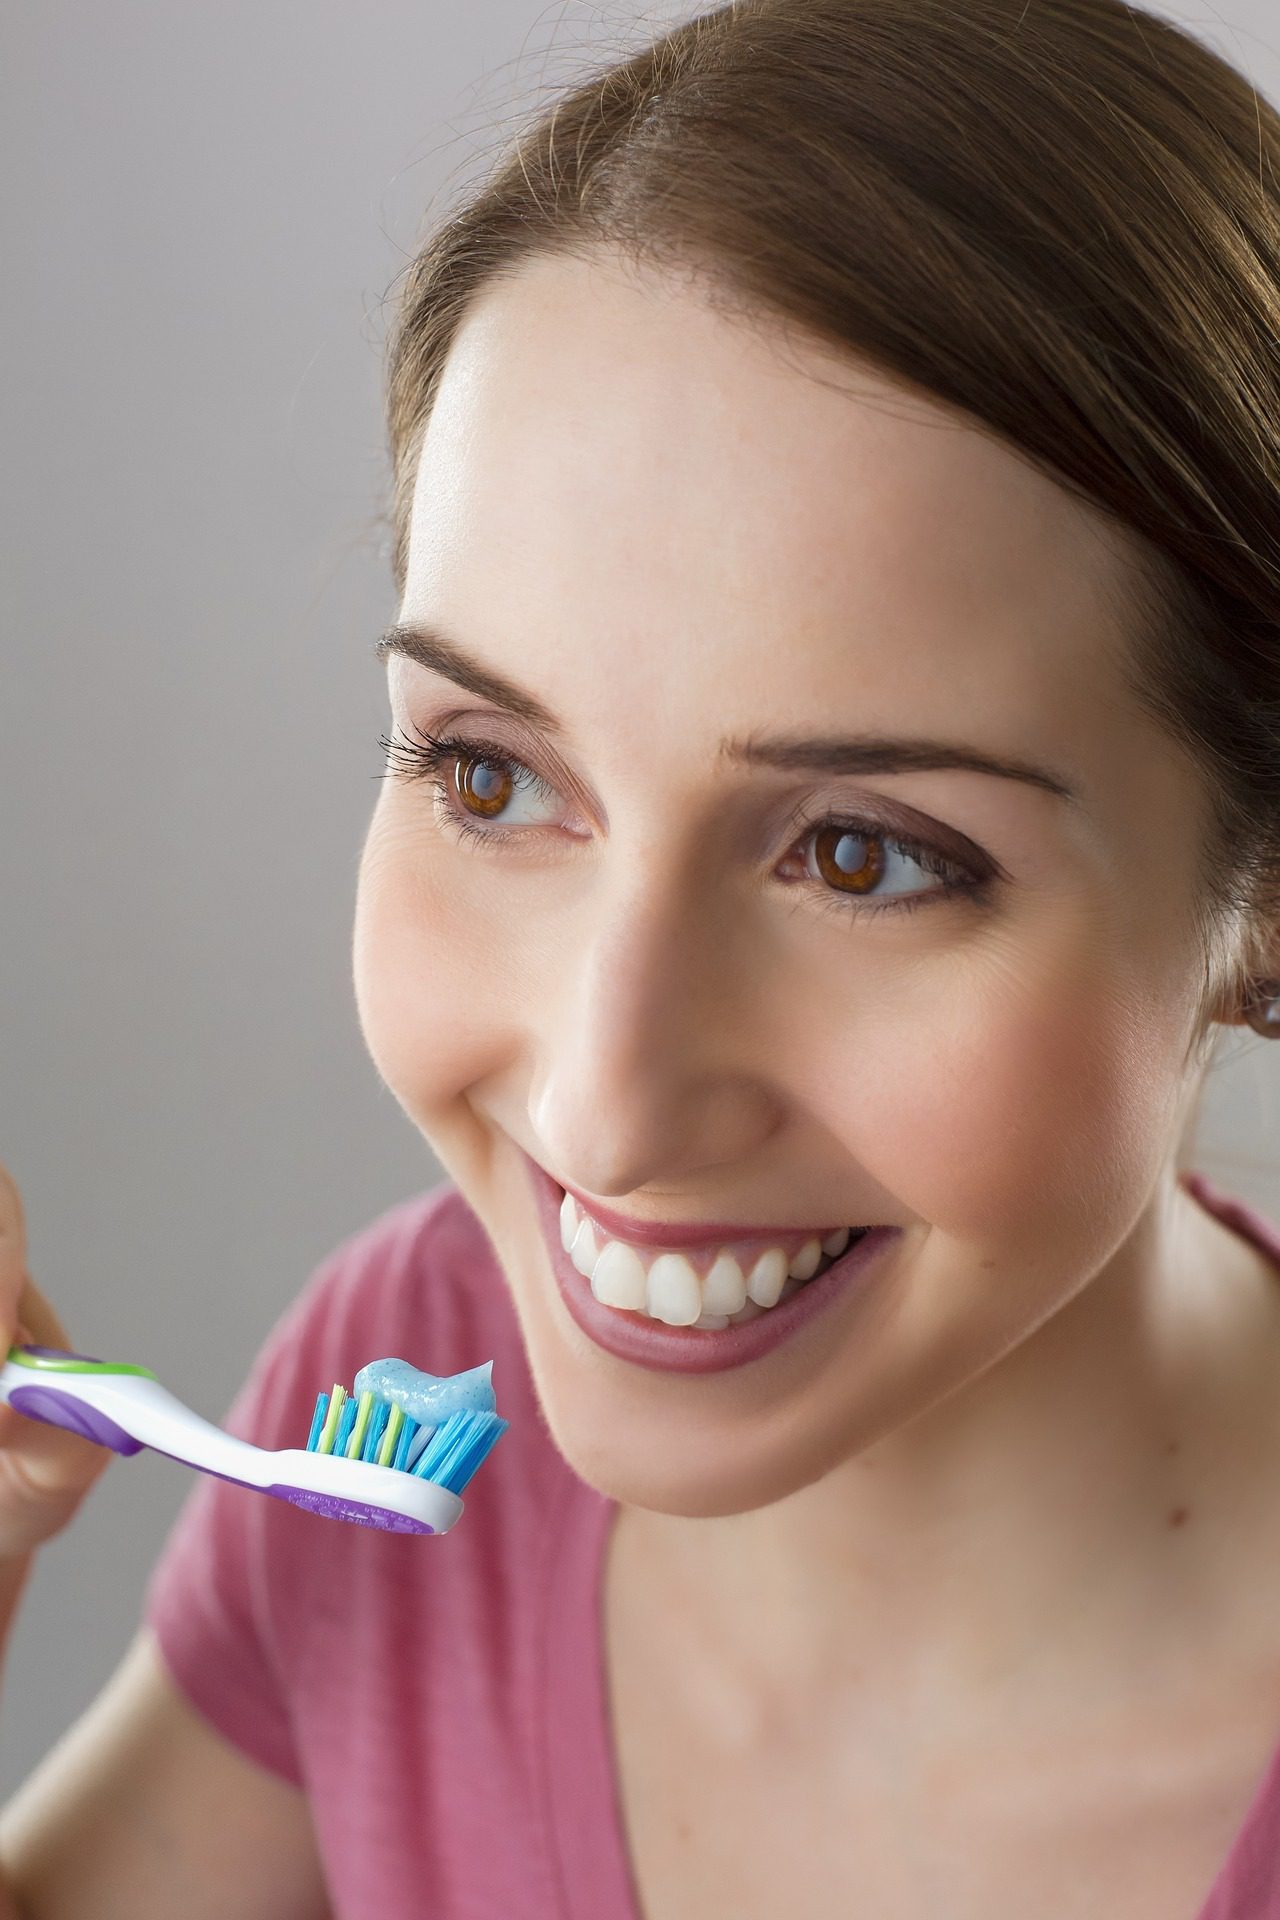 You are currently viewing Oral Care Tools & Deals You Should Look into Before 2020 Ends